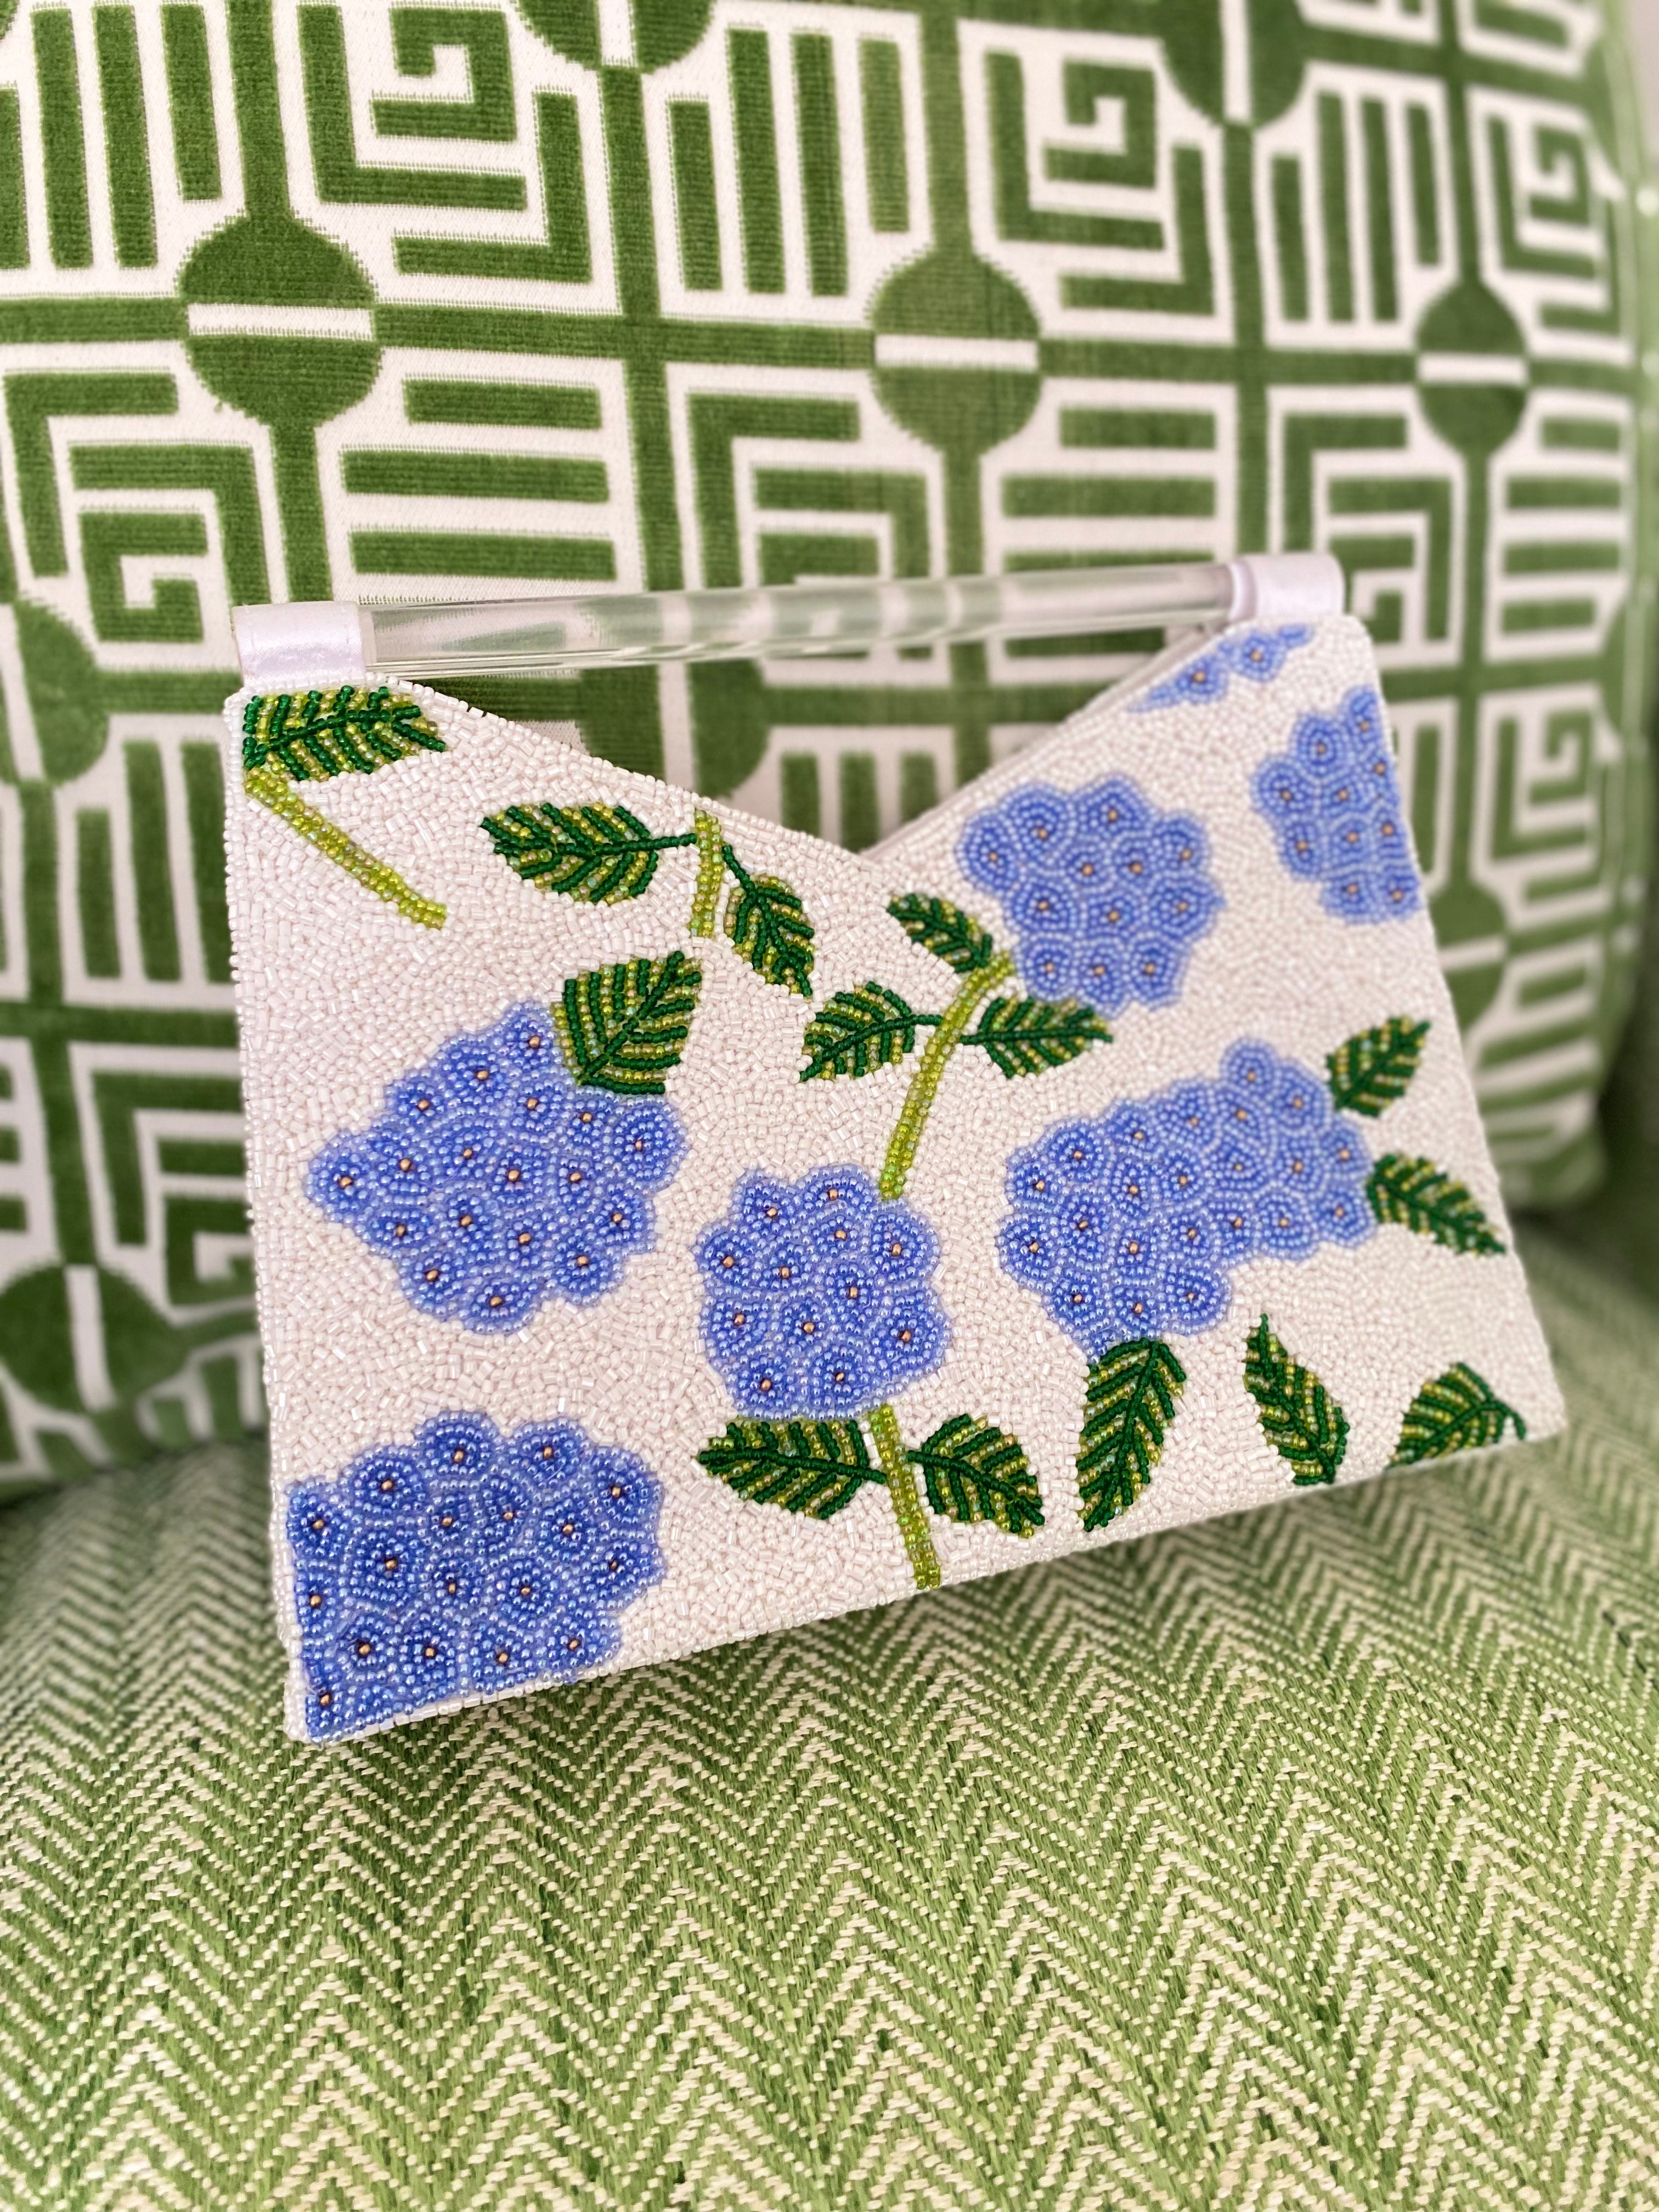 Acrylic Handle Clutch in Hydrangea Blossoms